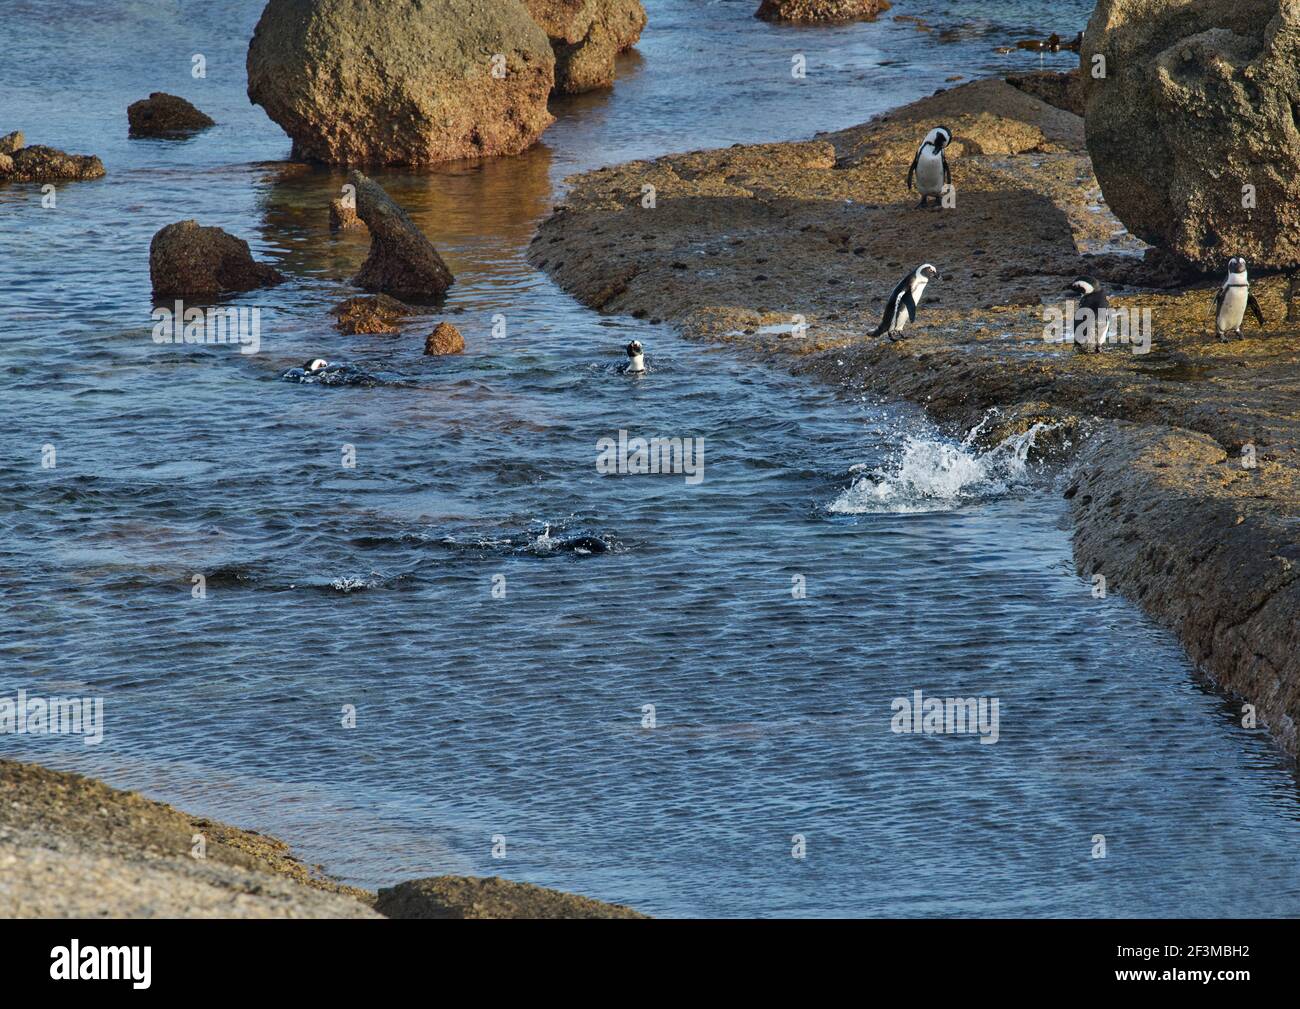 African or Cape Penguins at Bolders Penguin Sanctuary, Cape Town, South Africa Stock Photo